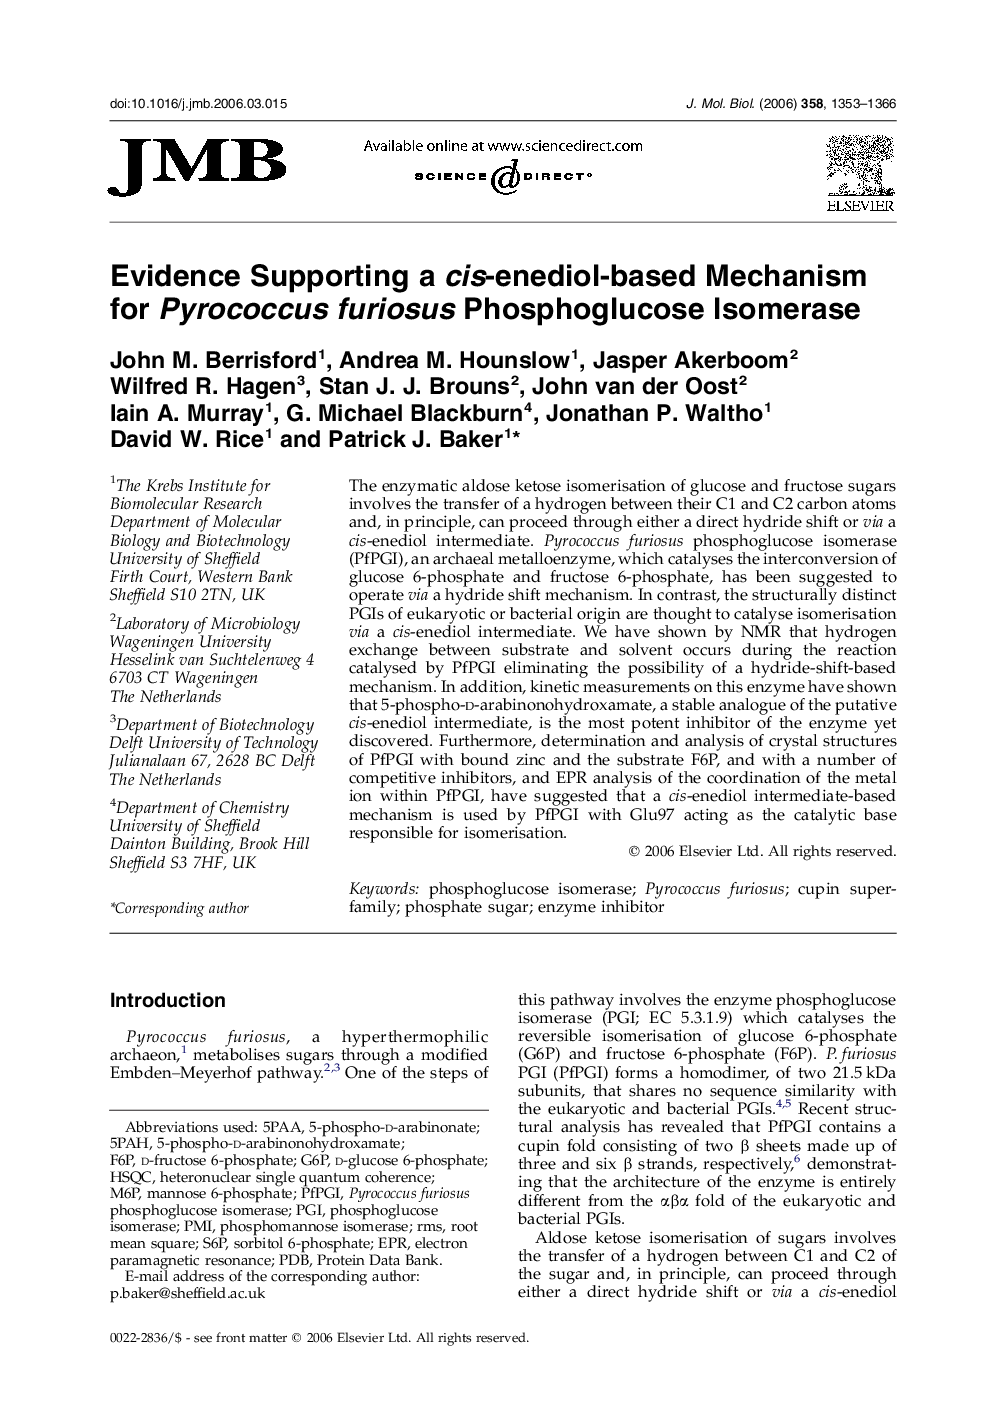 Evidence Supporting a cis-enediol-based Mechanism for Pyrococcus furiosus Phosphoglucose Isomerase